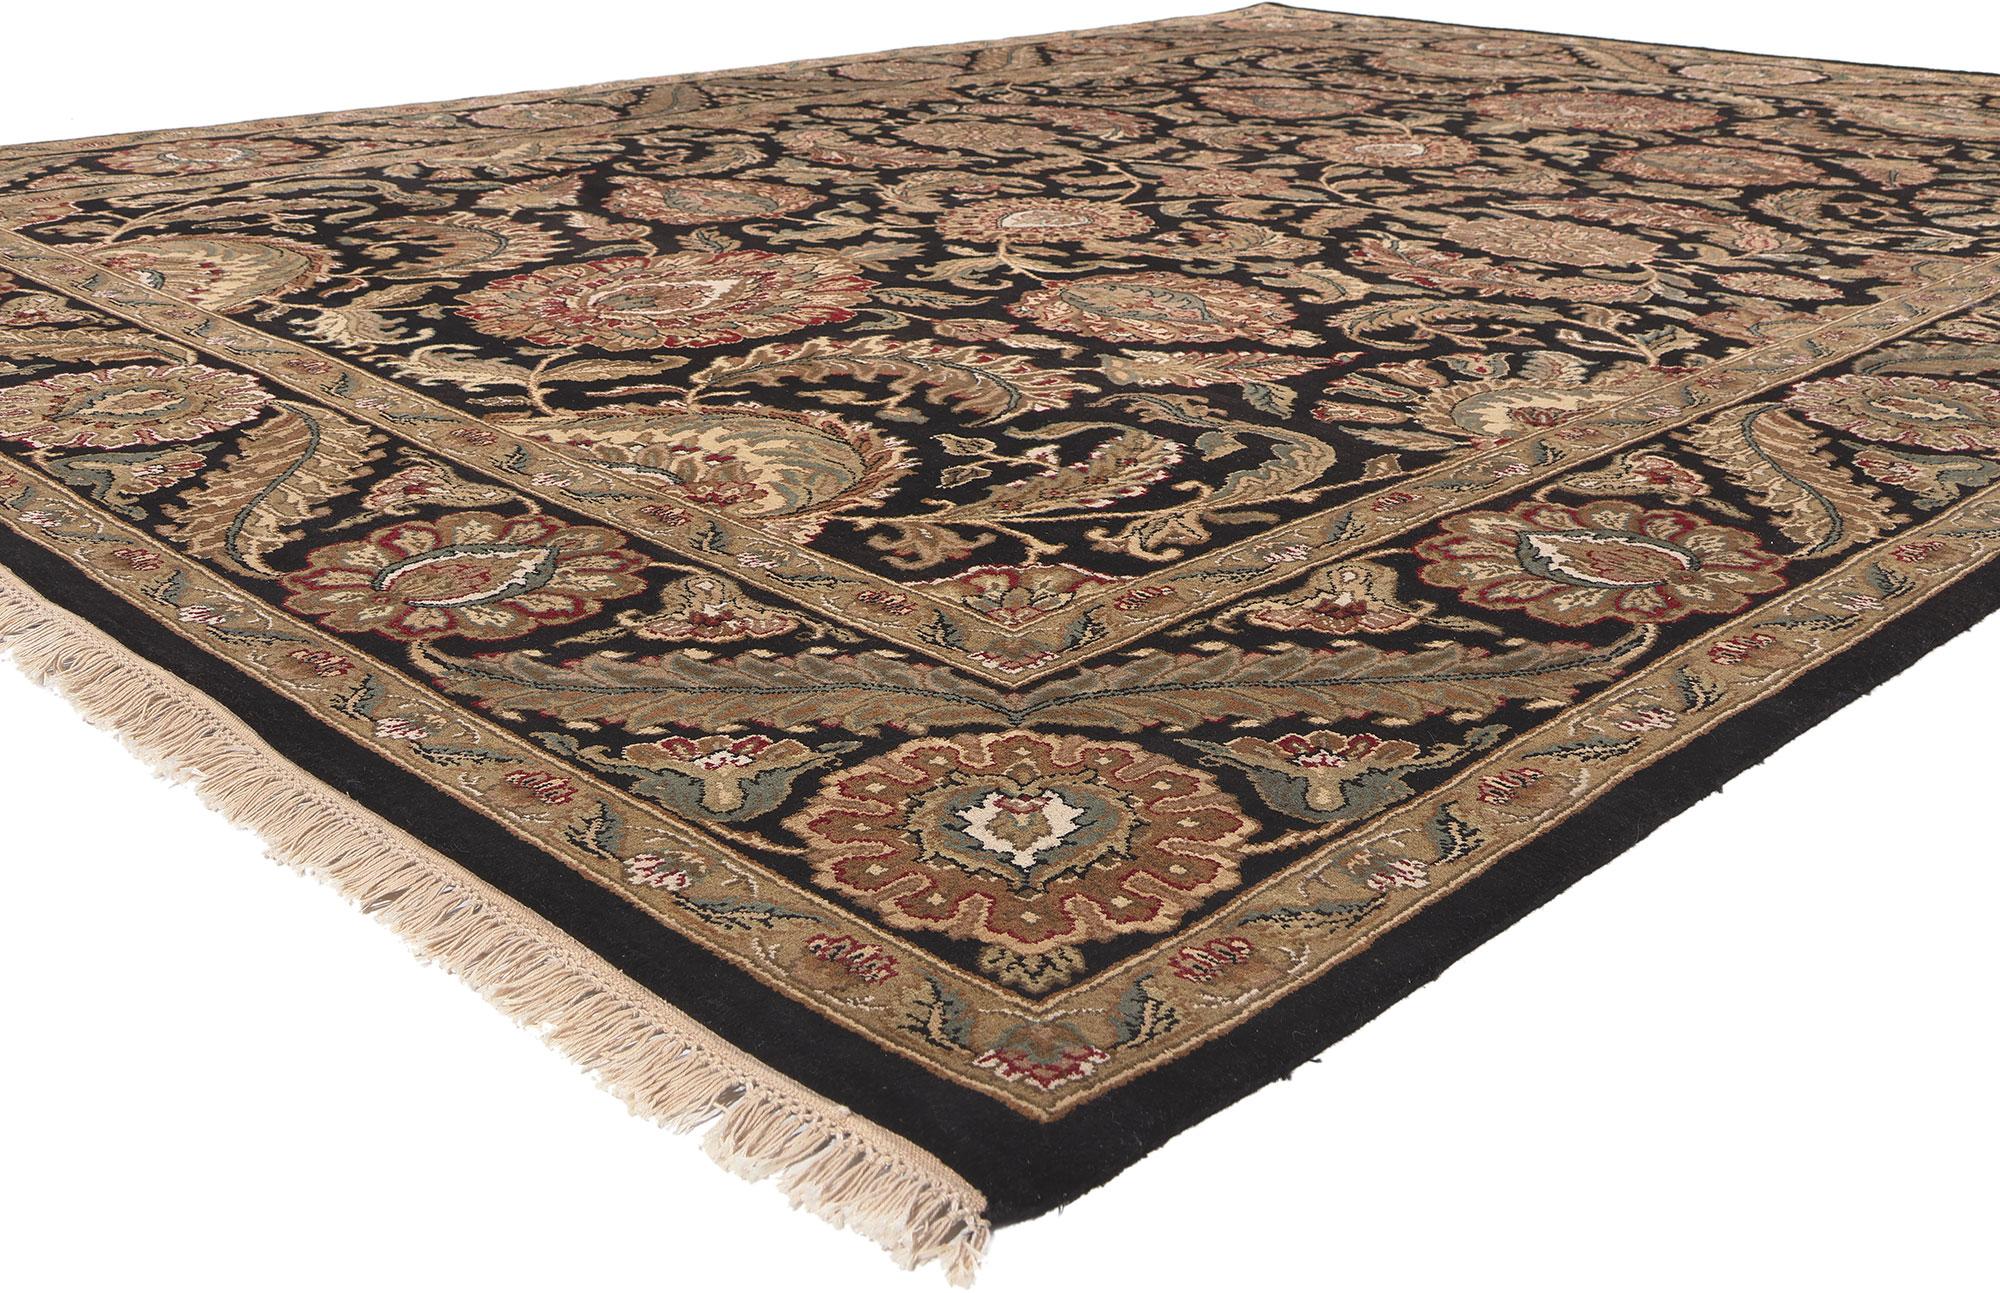 78678 Earth-Tone Vintage Indian Rug, 09'01 x 12'02. Indian rugs with Shah Abbasi designs are hand-knotted carpets featuring intricate floral motifs inspired by the Persian Shah Abbasi period, typically crafted in earth-tone colors and